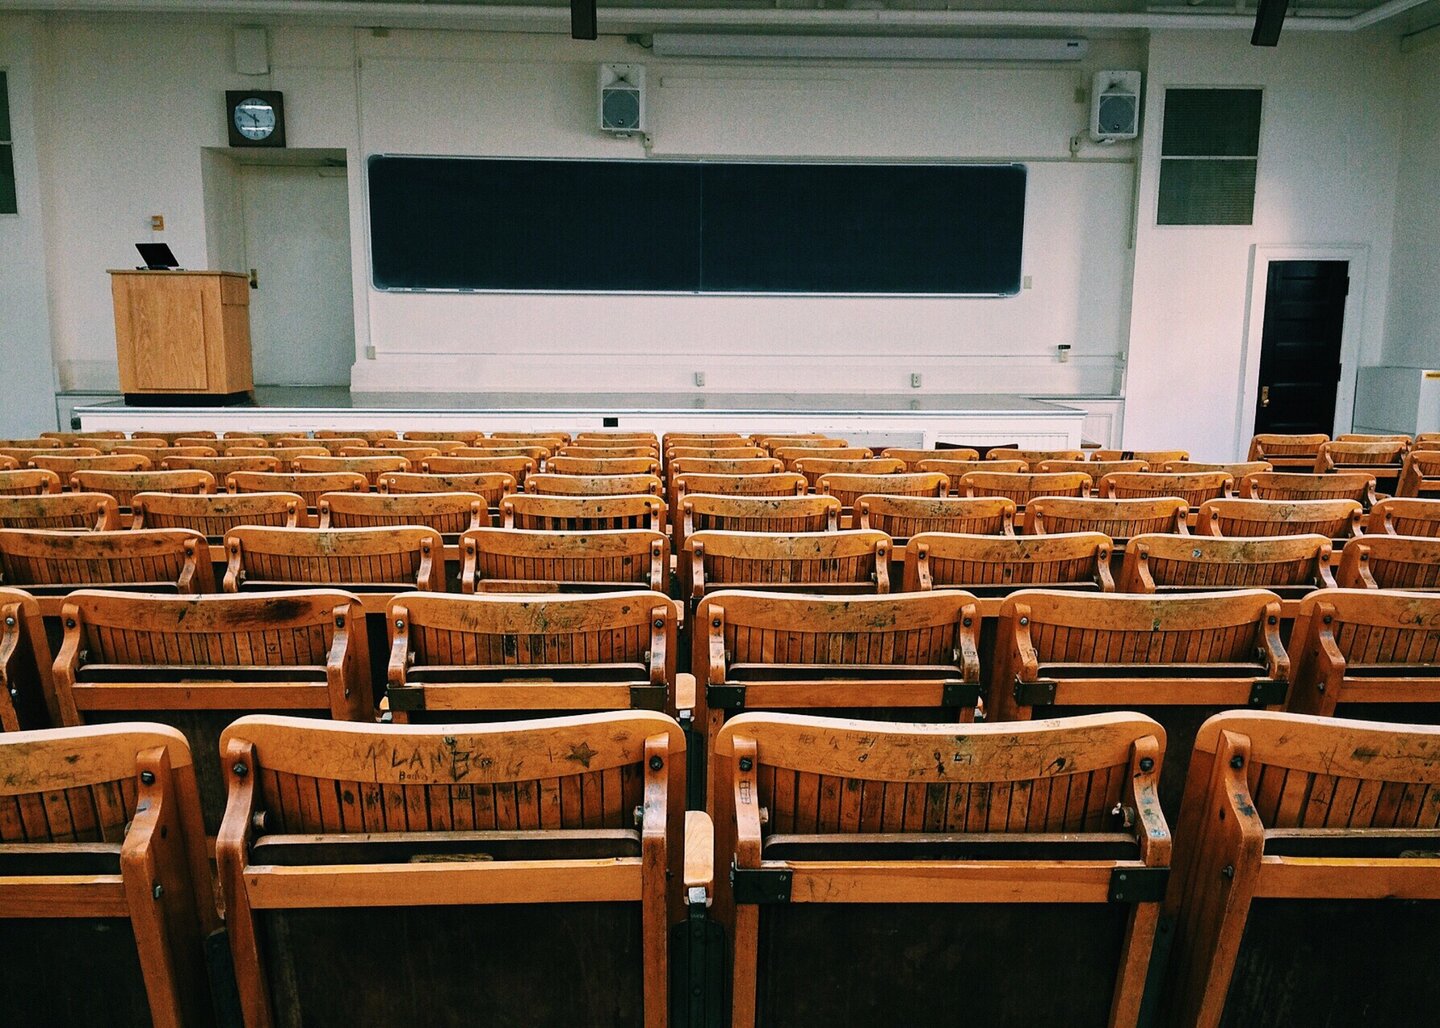 Empty seats in a lecture hall